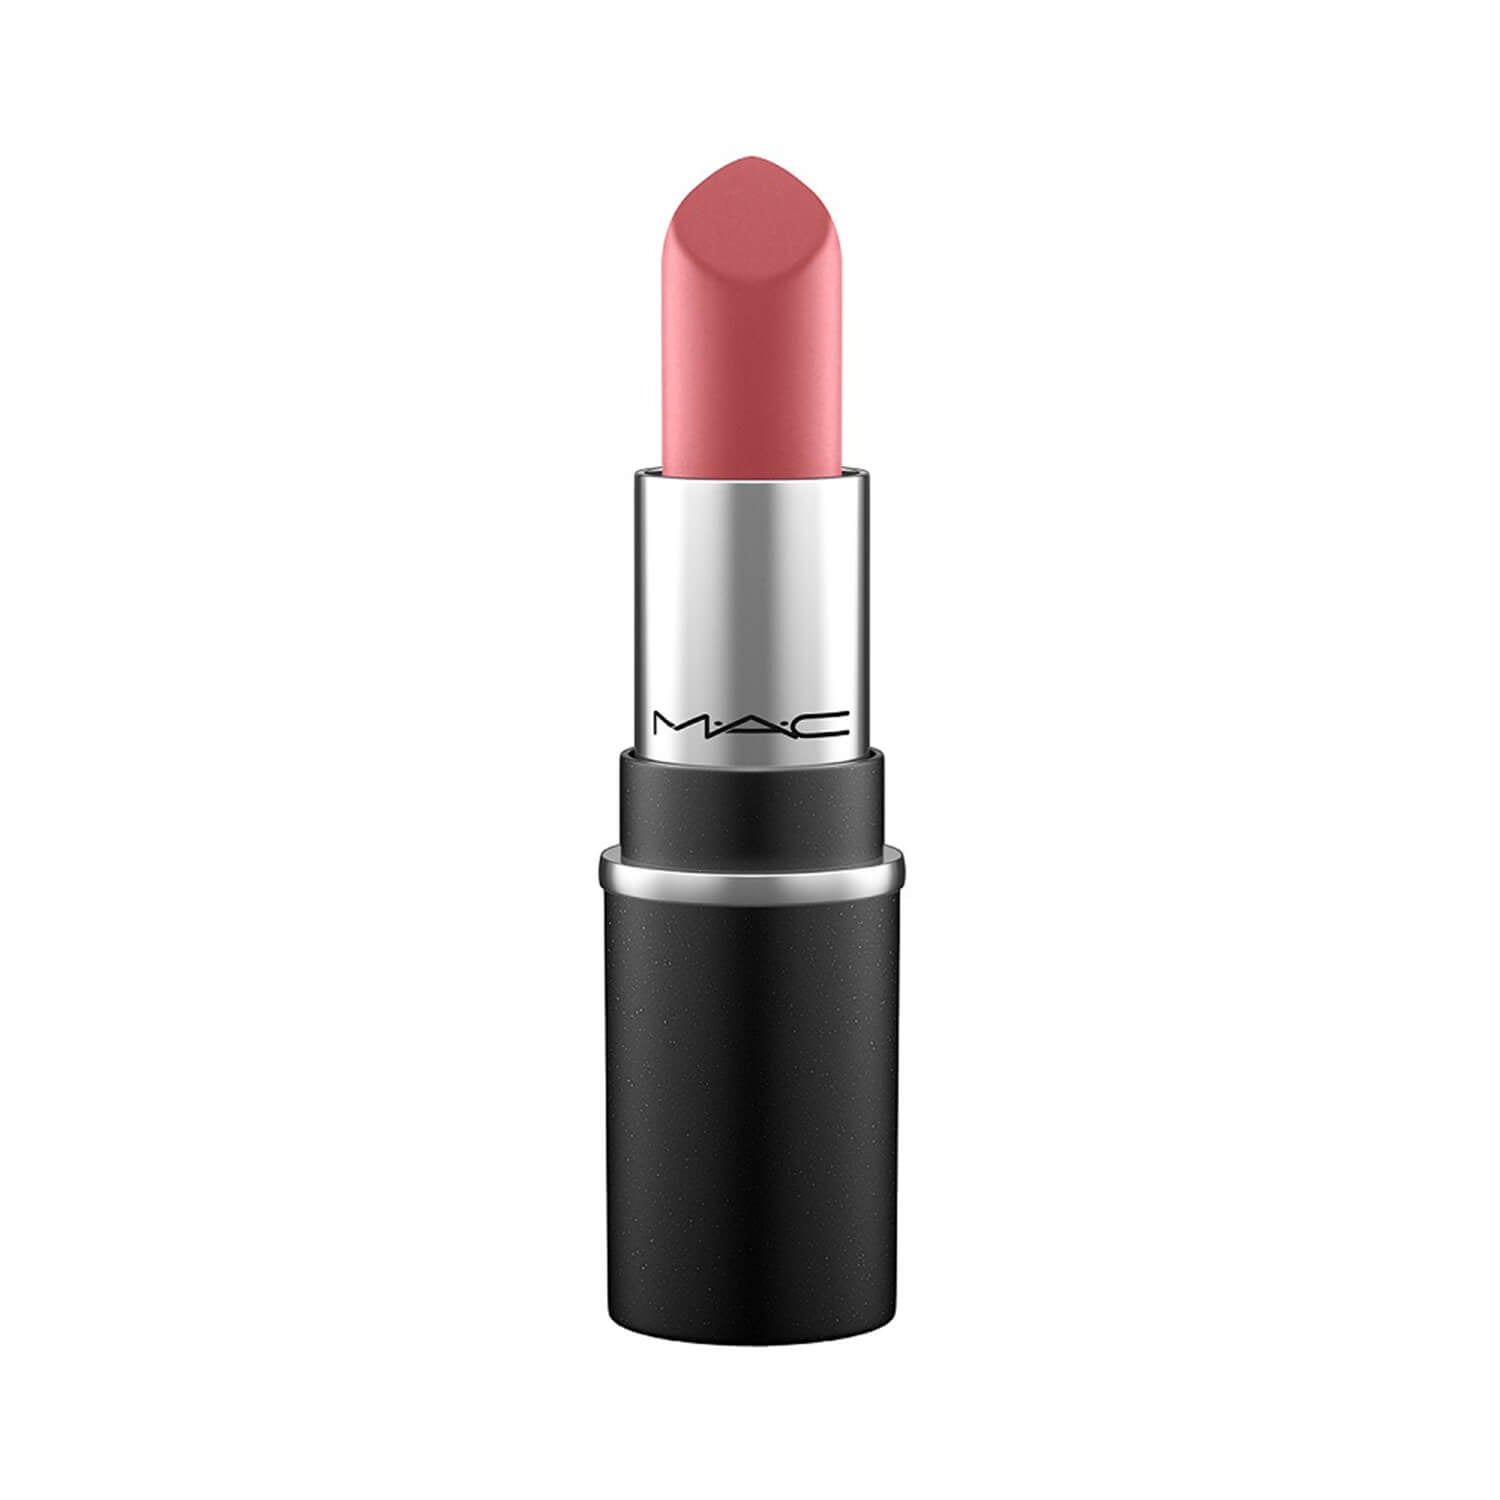 shop mac matte min lipstick in please me shade available at Heygirl.pk for delivery in Pakistan